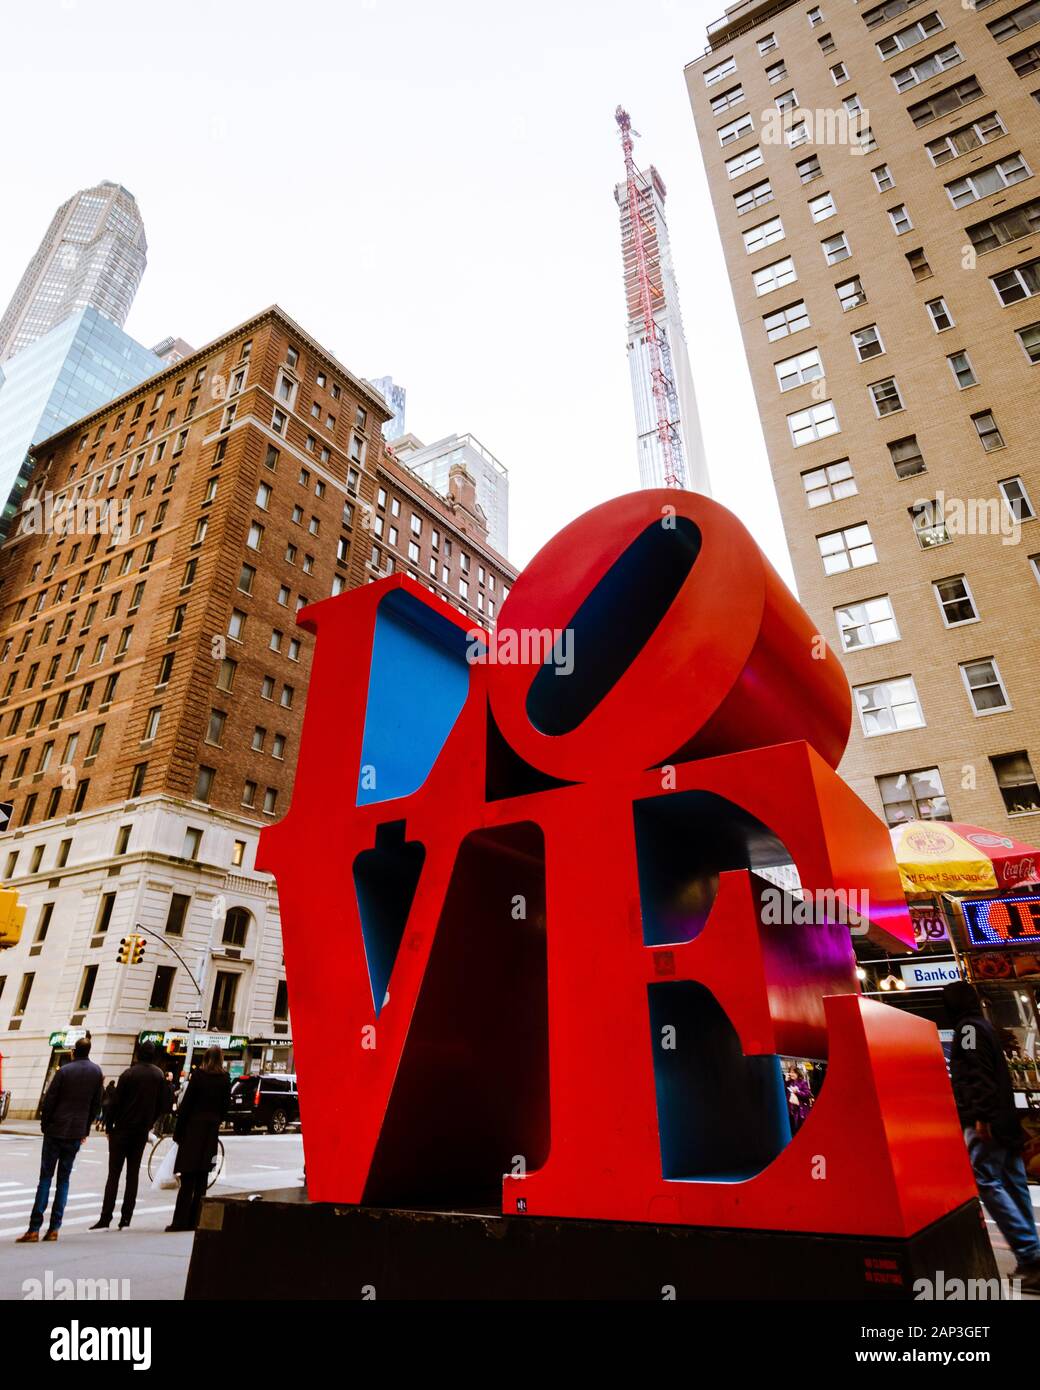 Wide angle view of the famous Love Sculpture in Manhattan in New York City located on W 55th St &, 6th Ave - New York, NY Stock Photo